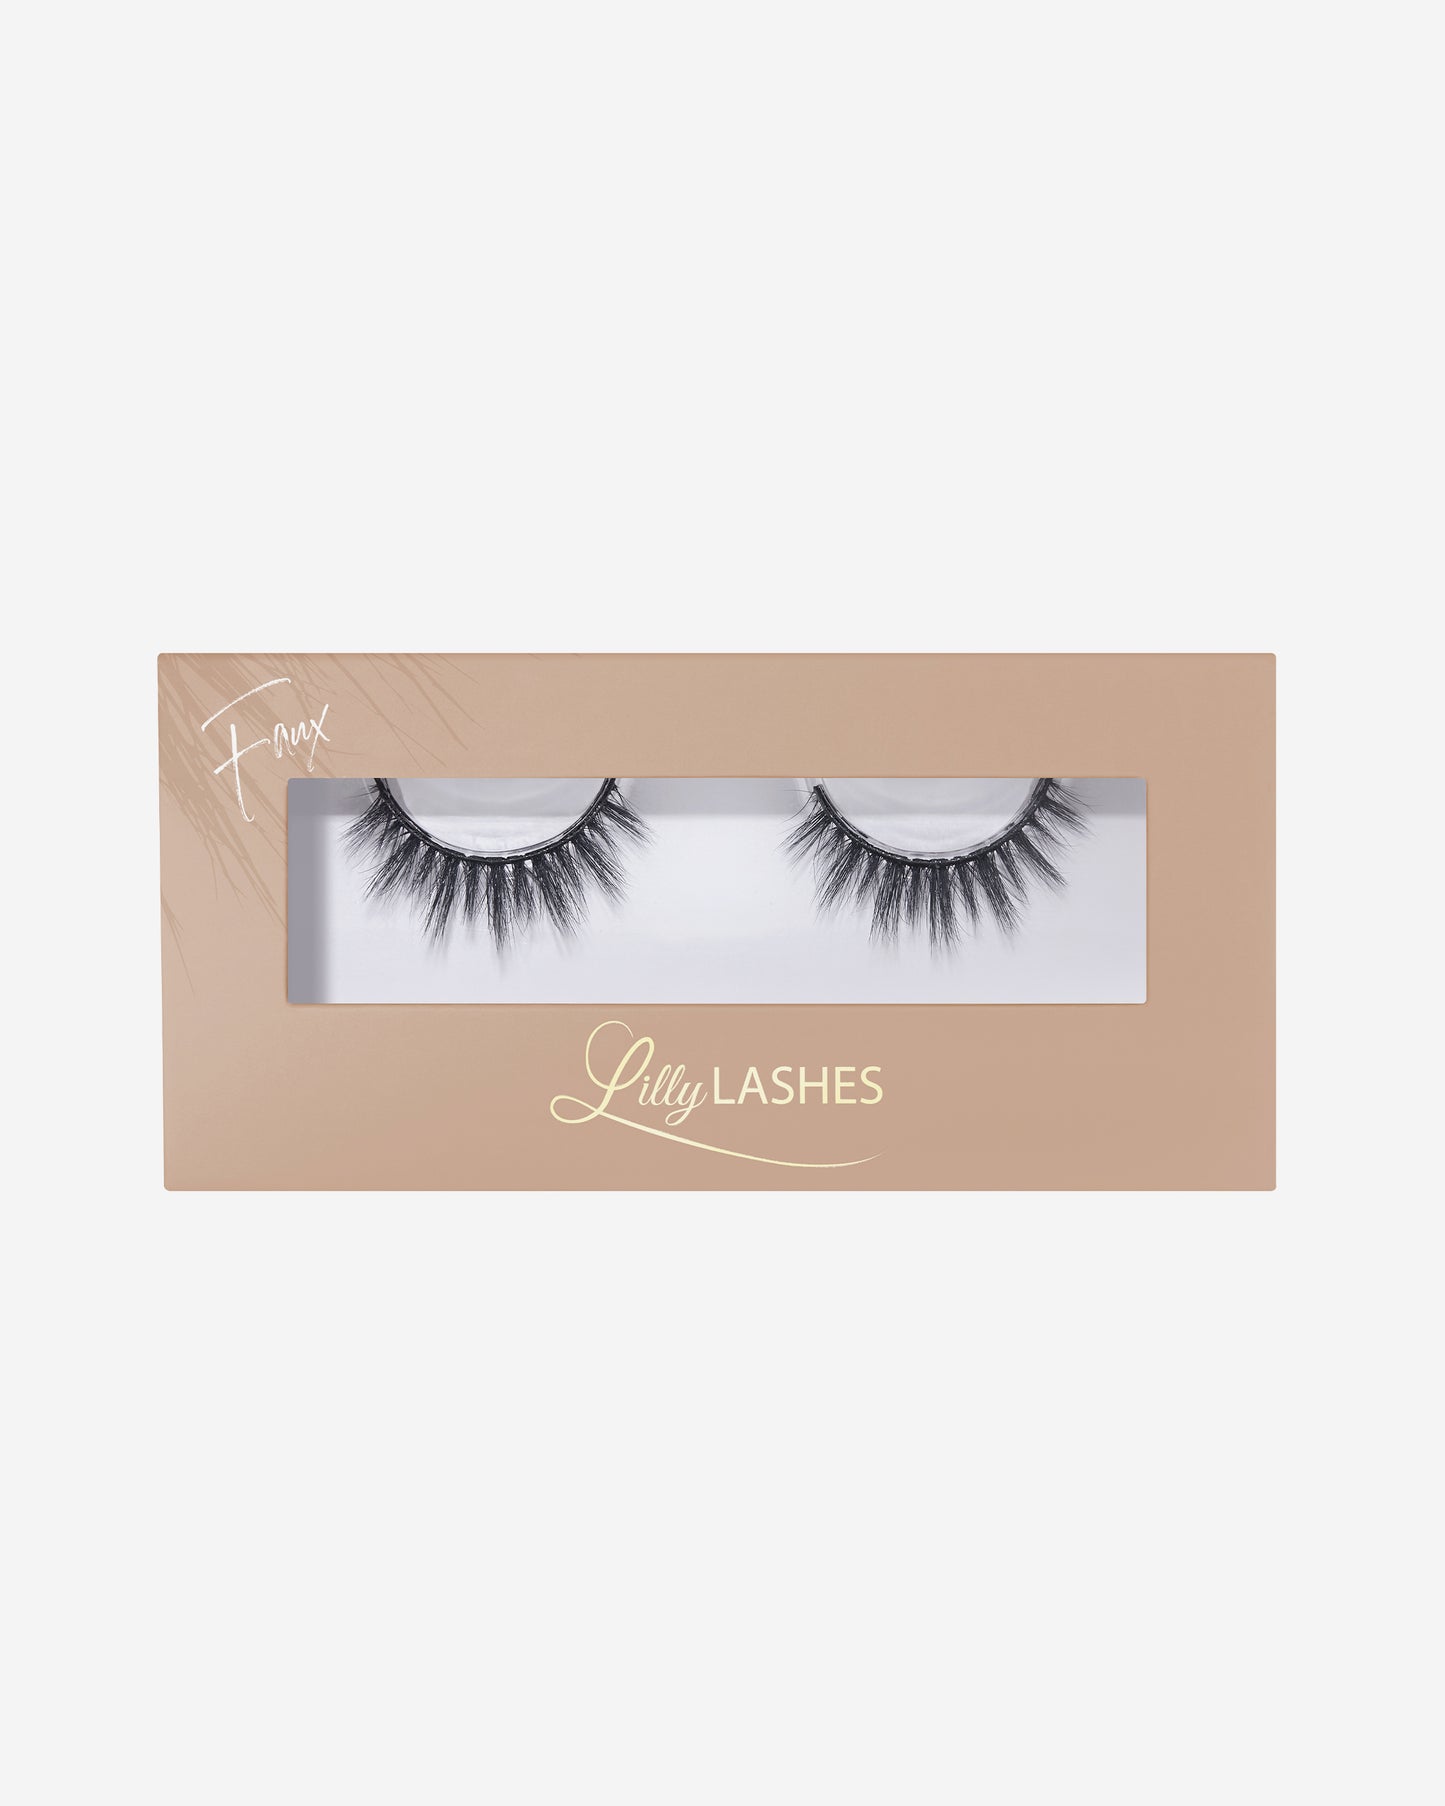 Lilly Lashes | Everyday | Miami | Front of Box